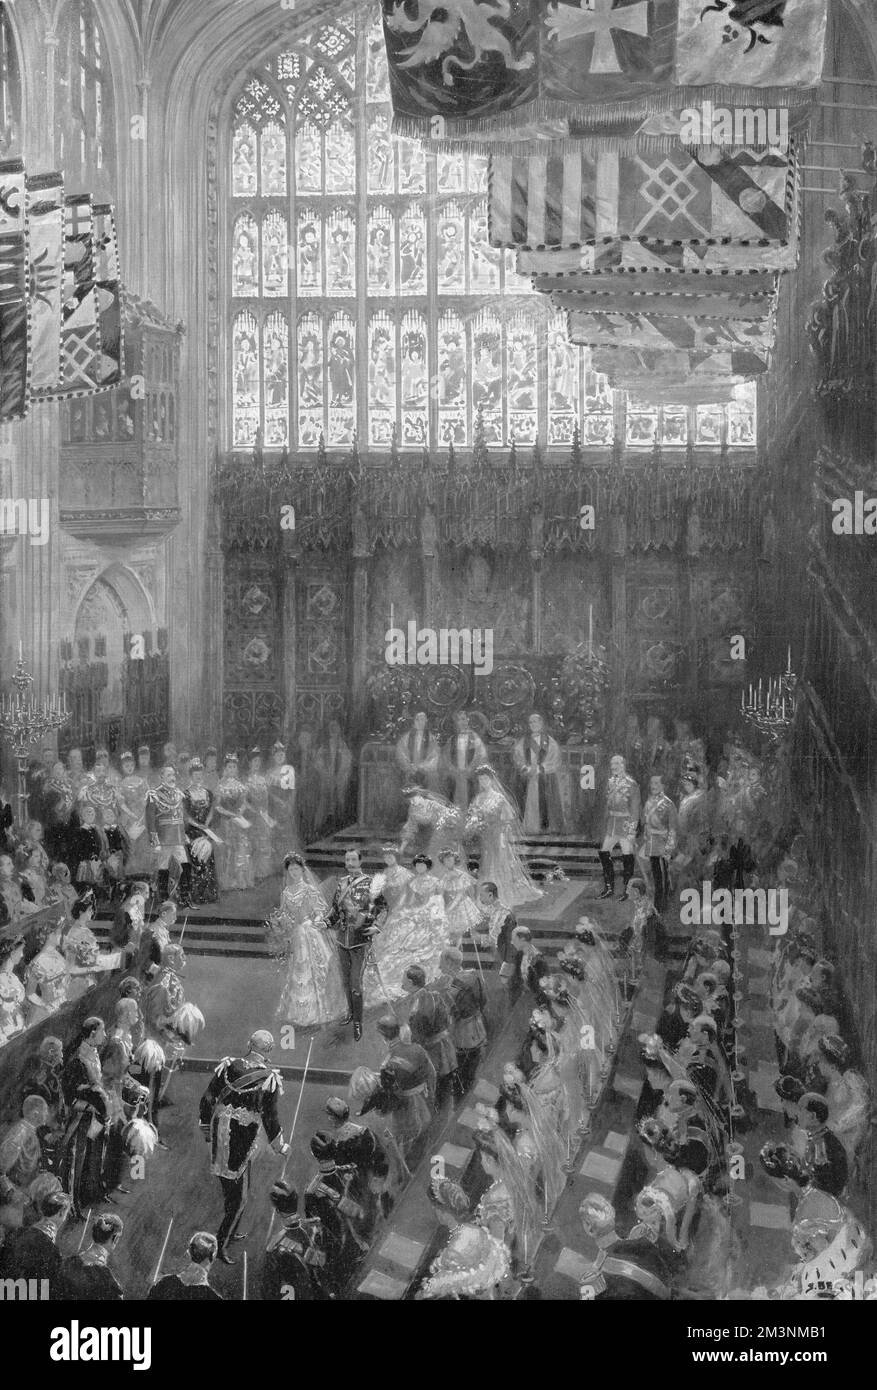 The wedding of Prince Alexander of Teck (1874 - 1957) to Princess Alice of Albany (1883 -1981) at St. Georges Chapel, Windsor on 10 February 1904.  The picture shows the newlyweds leaving the altar, with the magnificent Gothic arches and stained glass window providing a majestic backdrop.     Date: 1904 Stock Photo